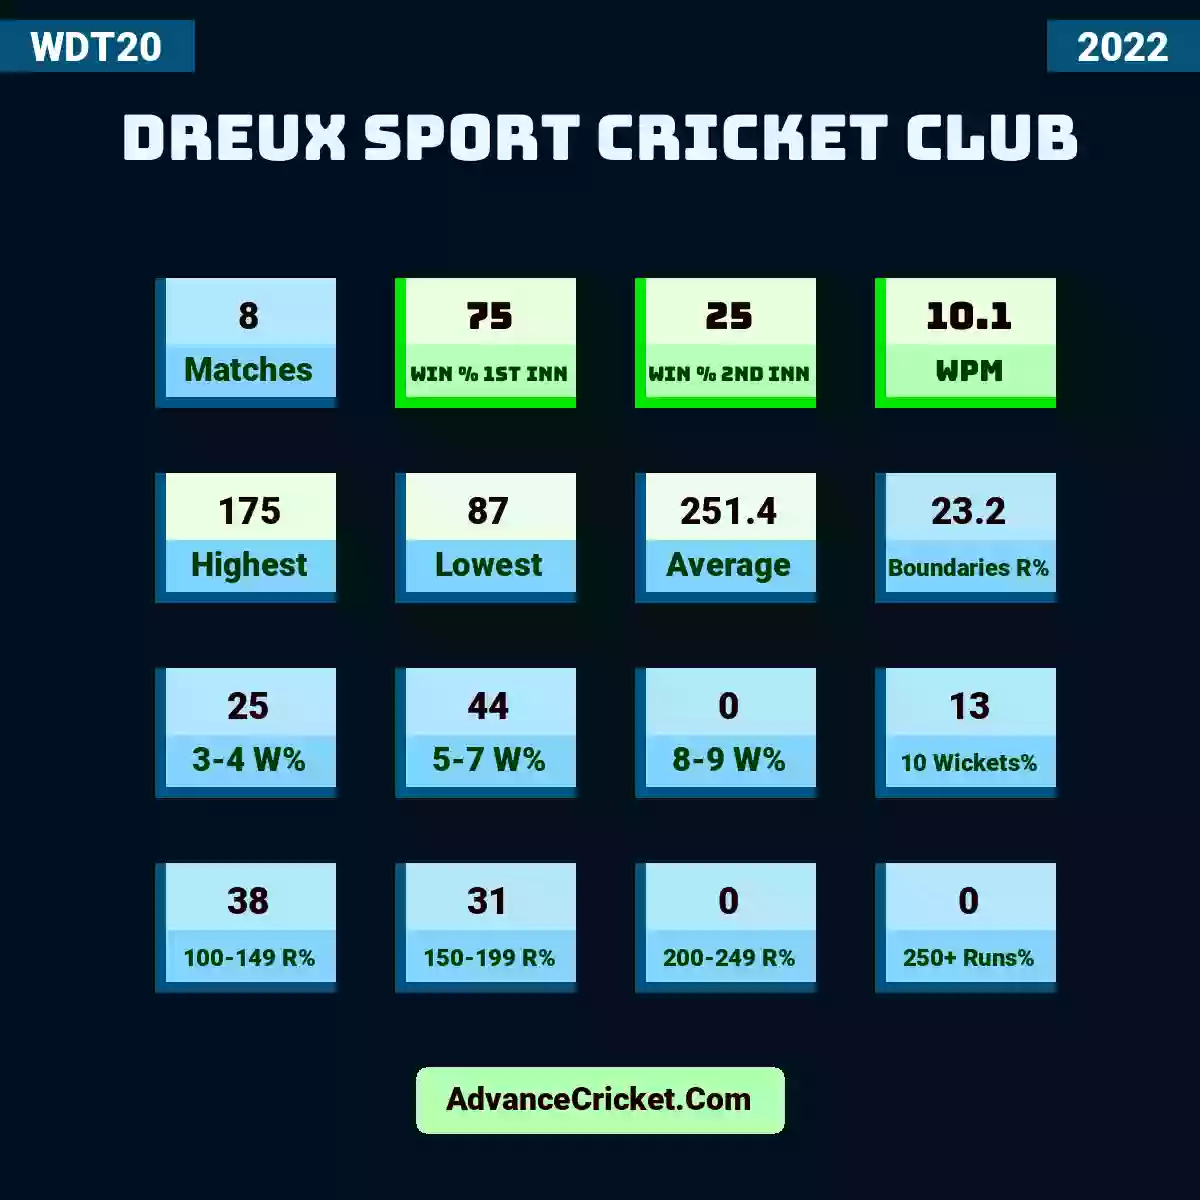 Image showing Dreux Sport Cricket Club with Matches: 8, Win % 1st Inn: 75, Win % 2nd Inn: 25, WPM: 10.1, Highest: 175, Lowest: 87, Average: 251.4, Boundaries R%: 23.2, 3-4 W%: 25, 5-7 W%: 44, 8-9 W%: 0, 10 Wickets%: 13, 100-149 R%: 38, 150-199 R%: 31, 200-249 R%: 0, 250+ Runs%: 0.